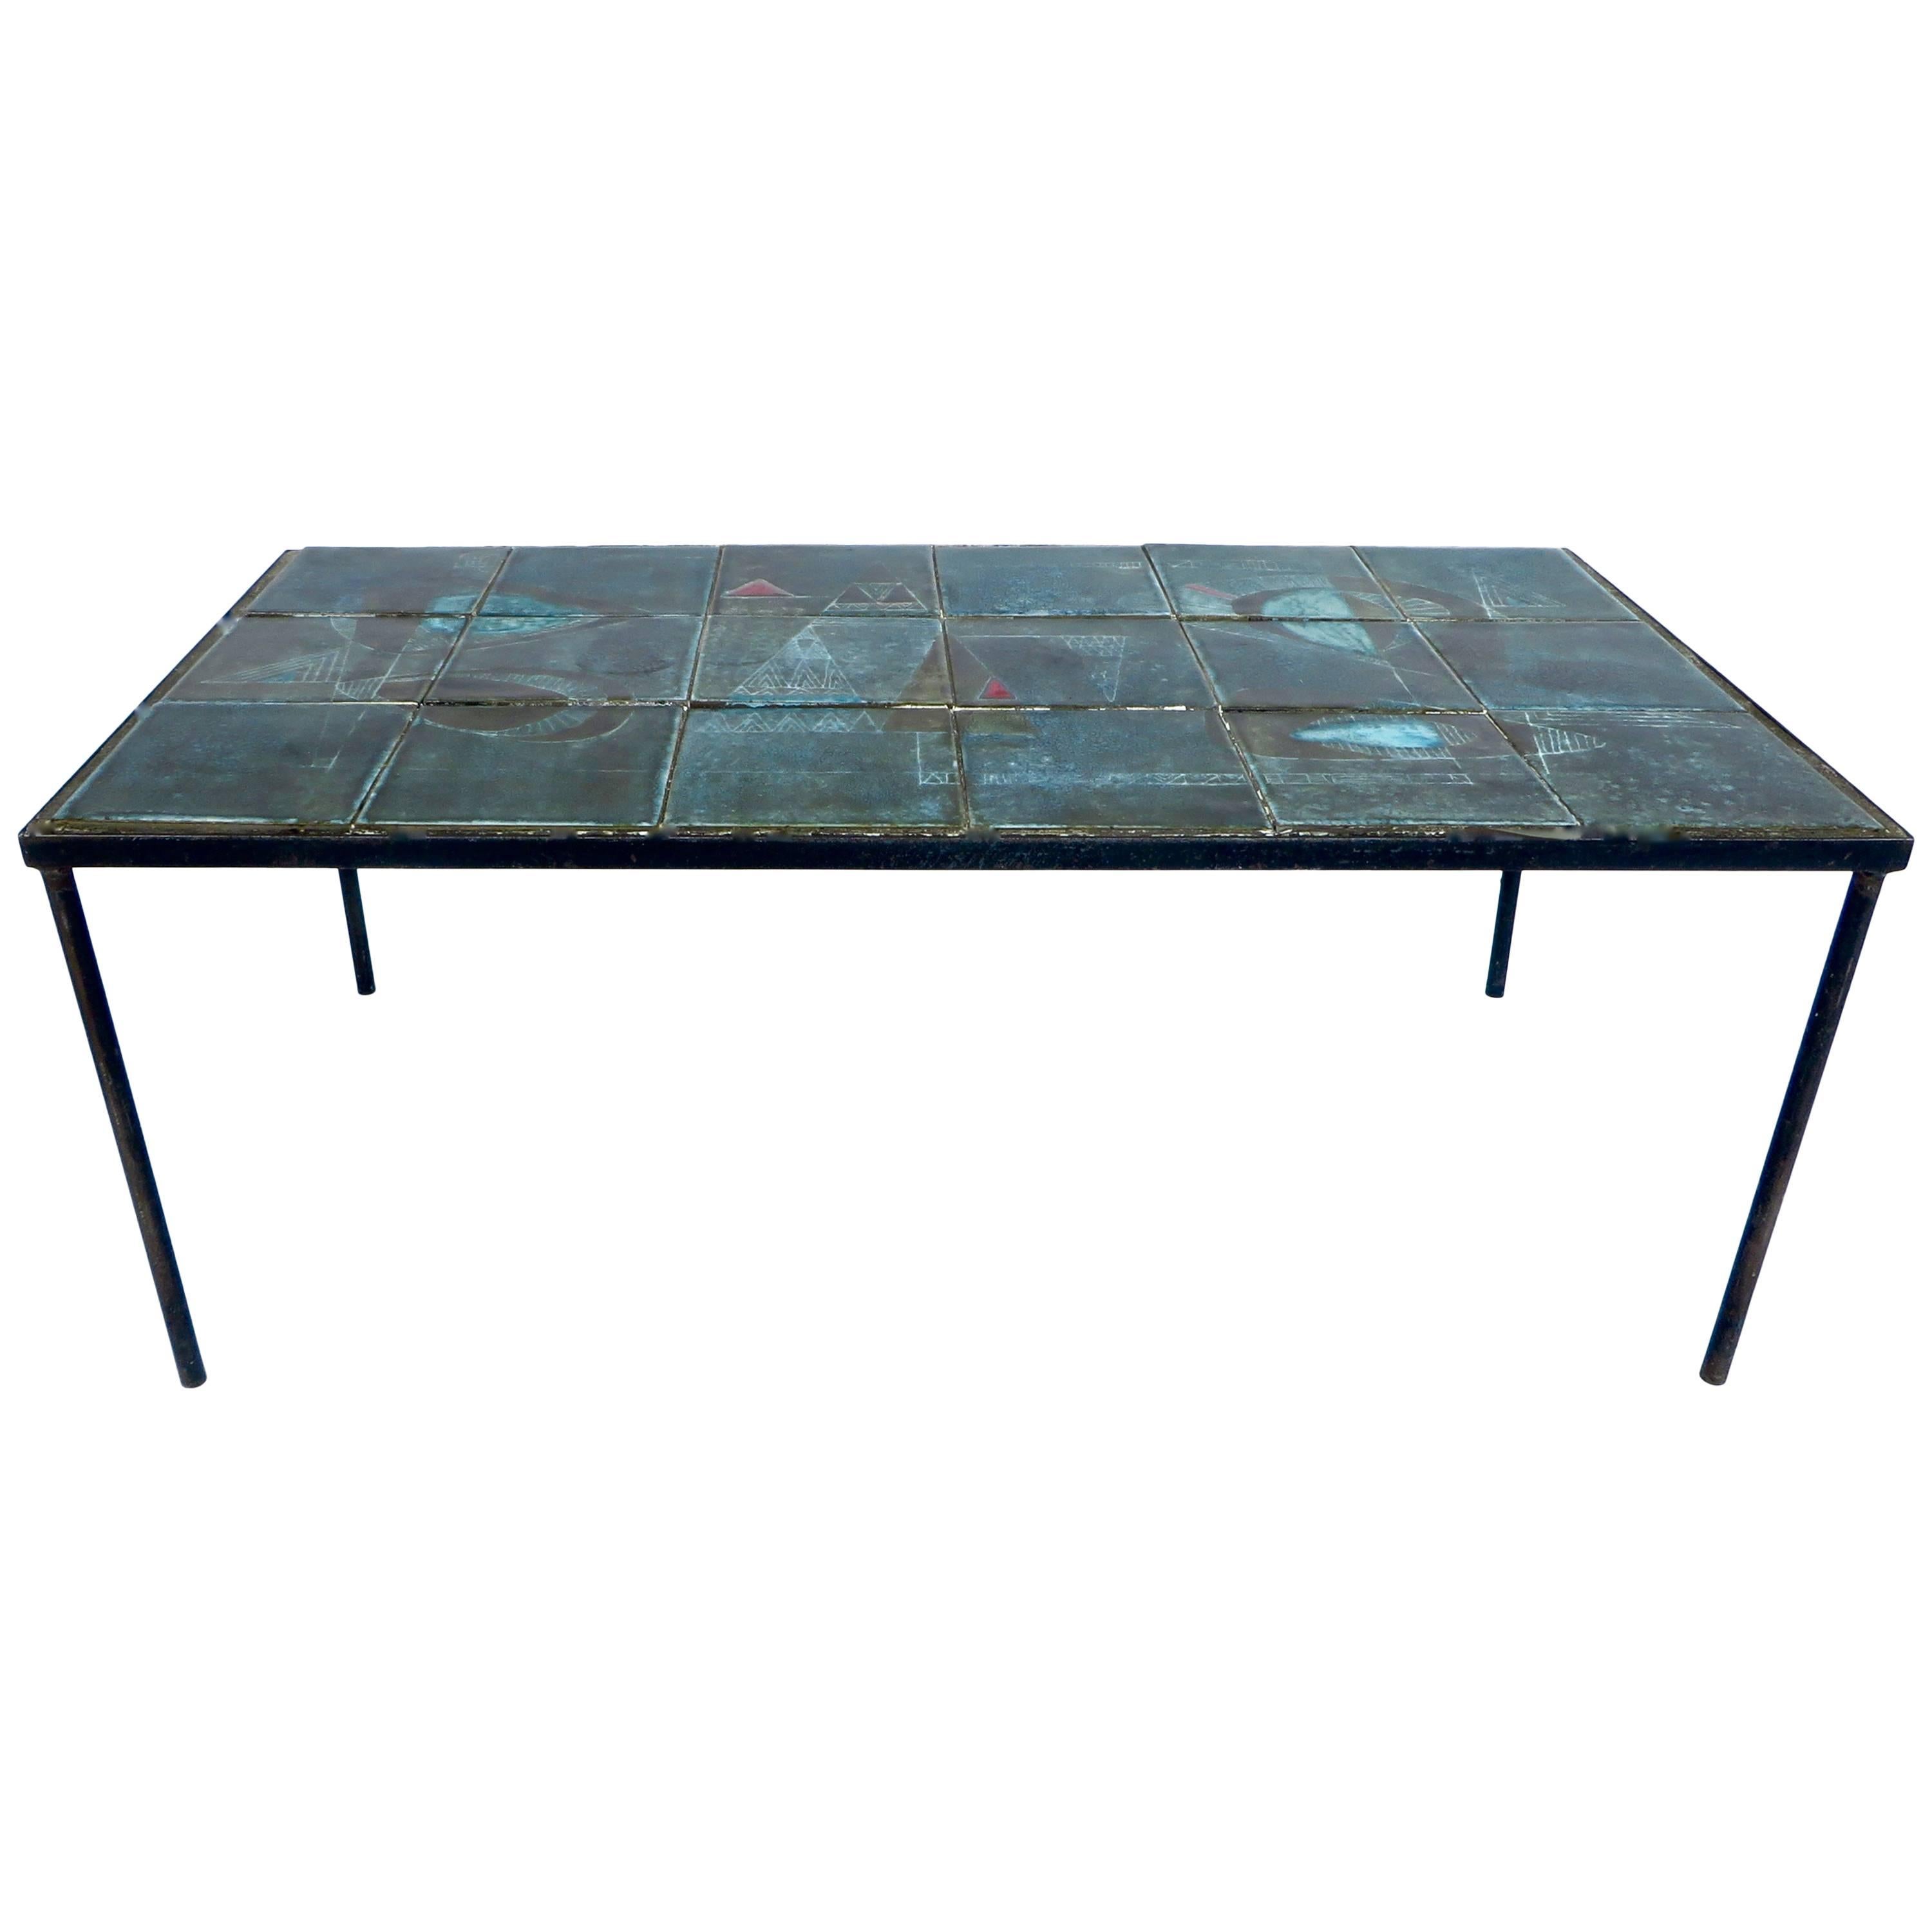 French Graphic Ceramic Tile Coffee Table by Les Deux Potiers Two Potiers 